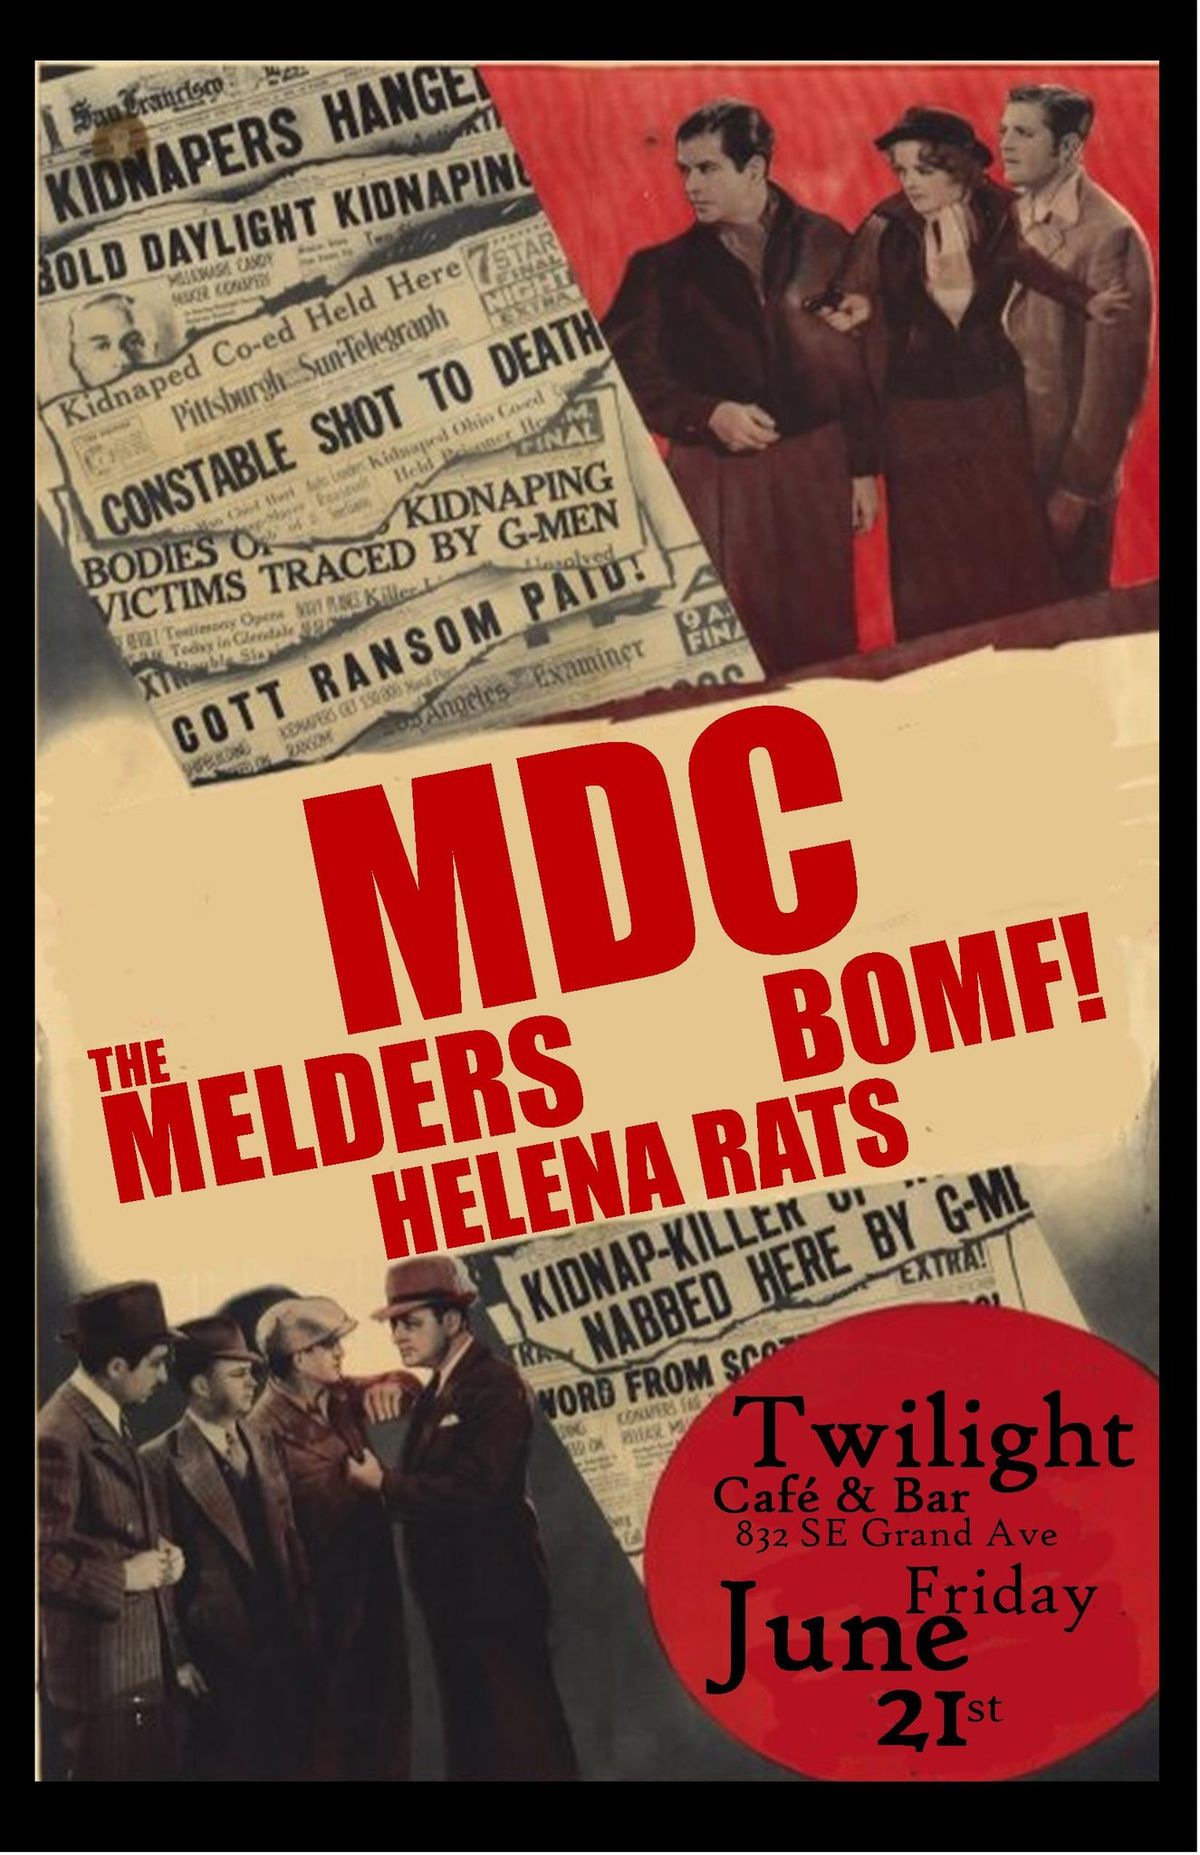 MDC, The Melders, BOMF!, & Helena Rats at The Twilight Cafe & Bar